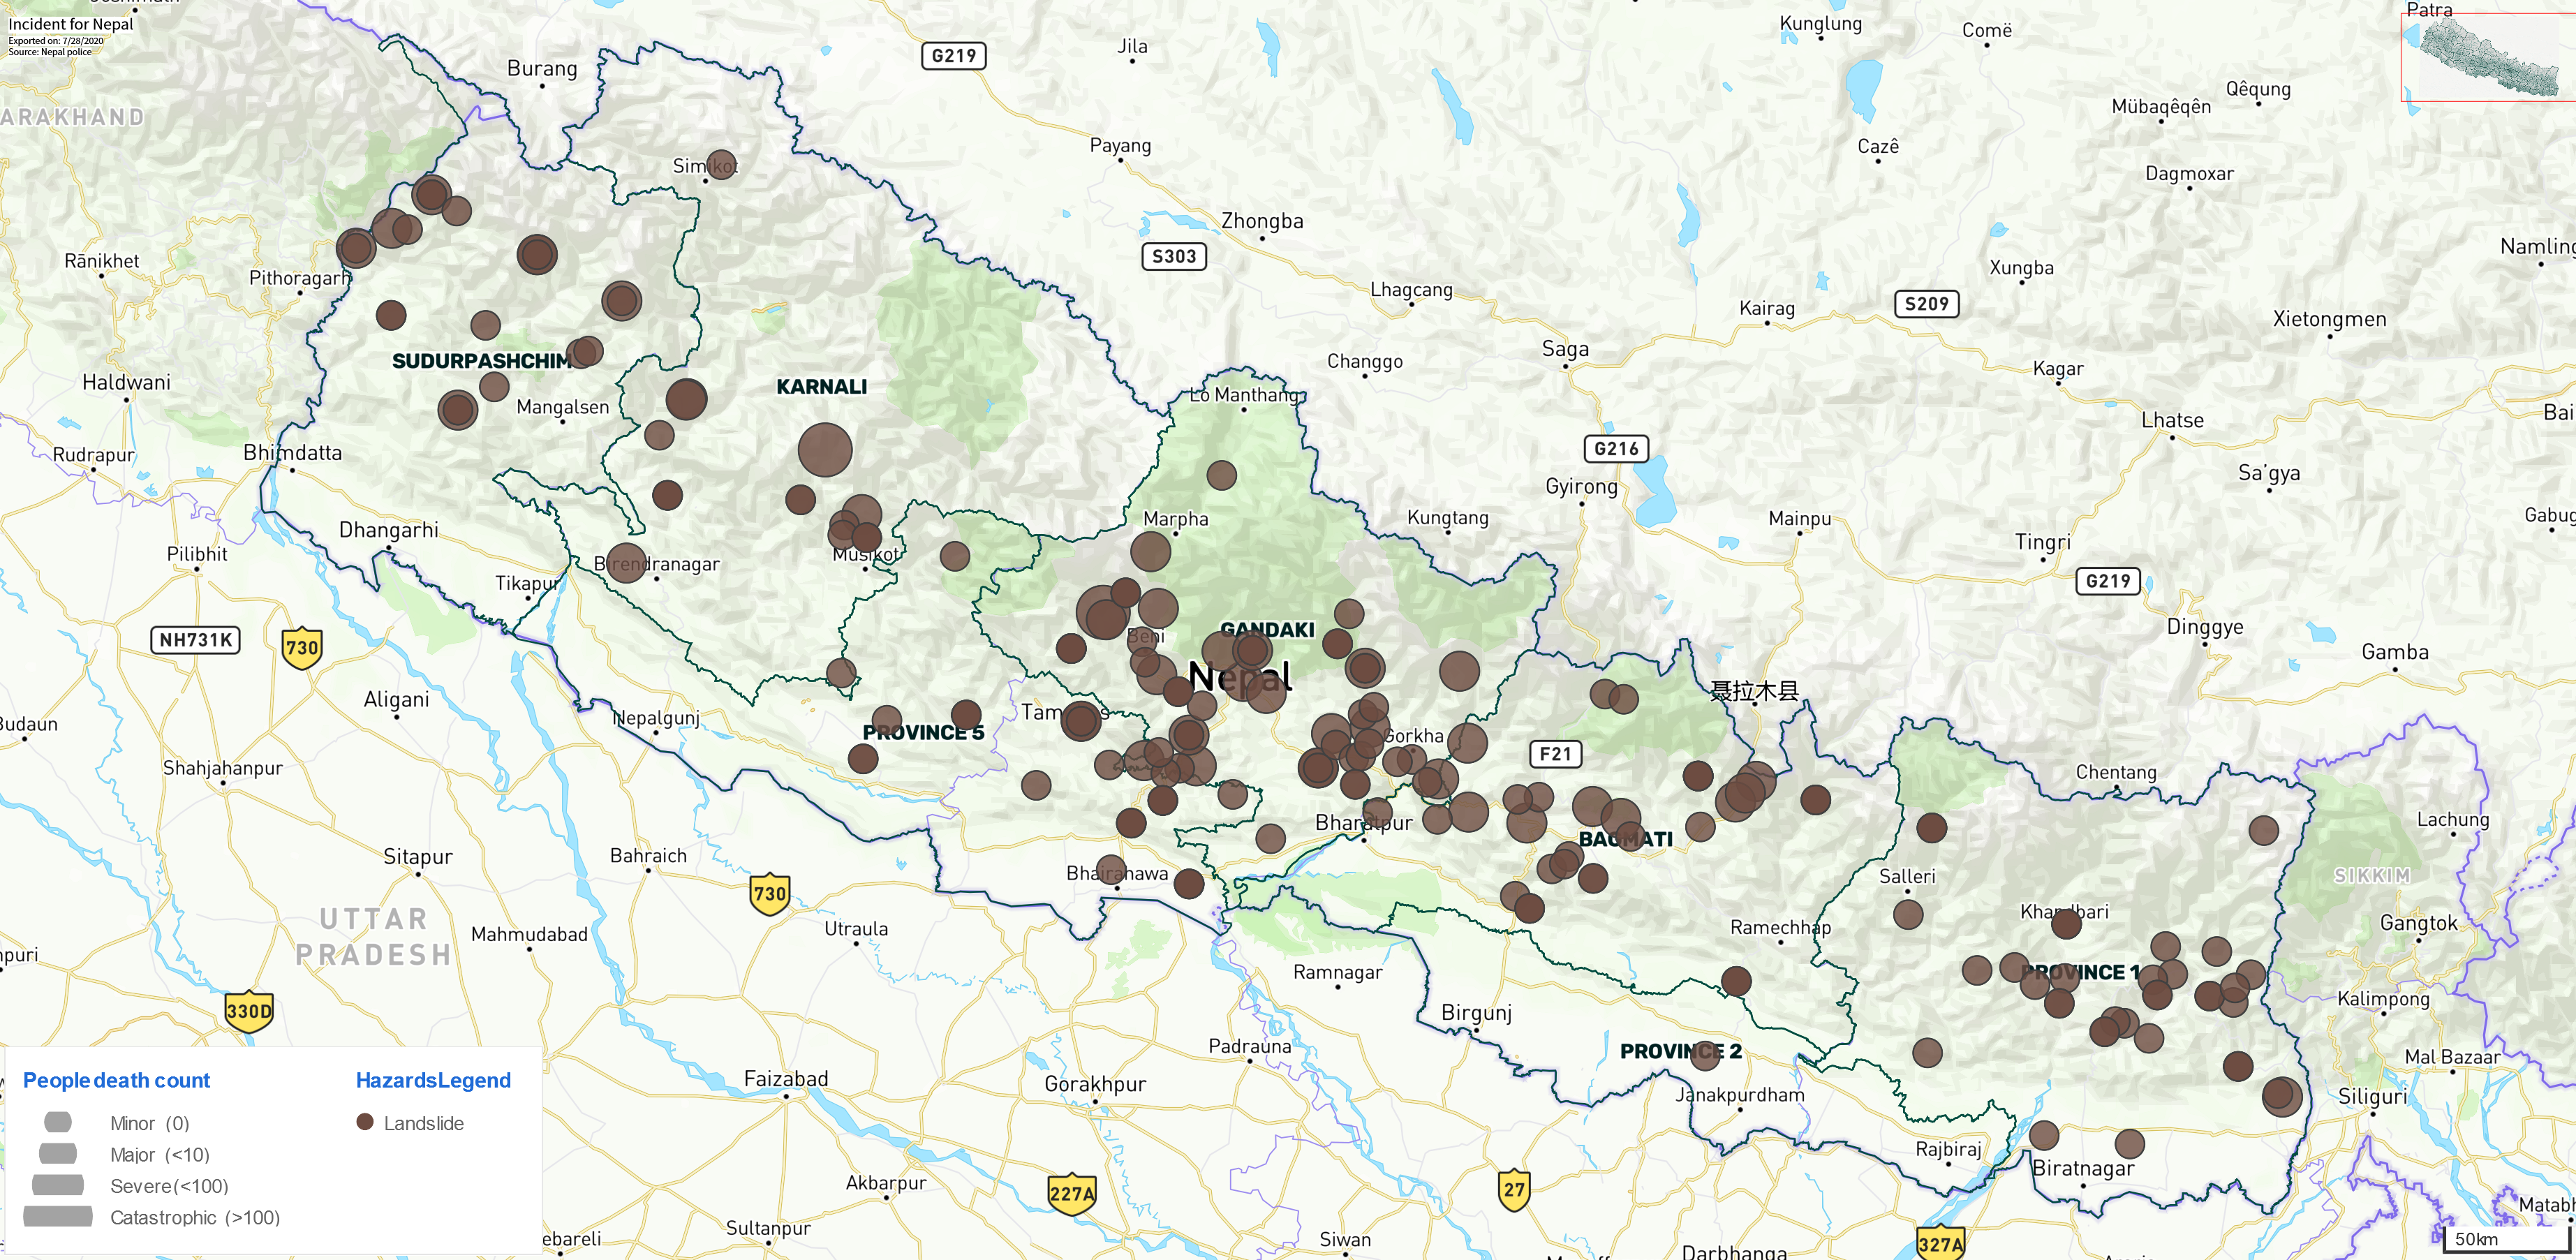 Mapping landslides in Nepal